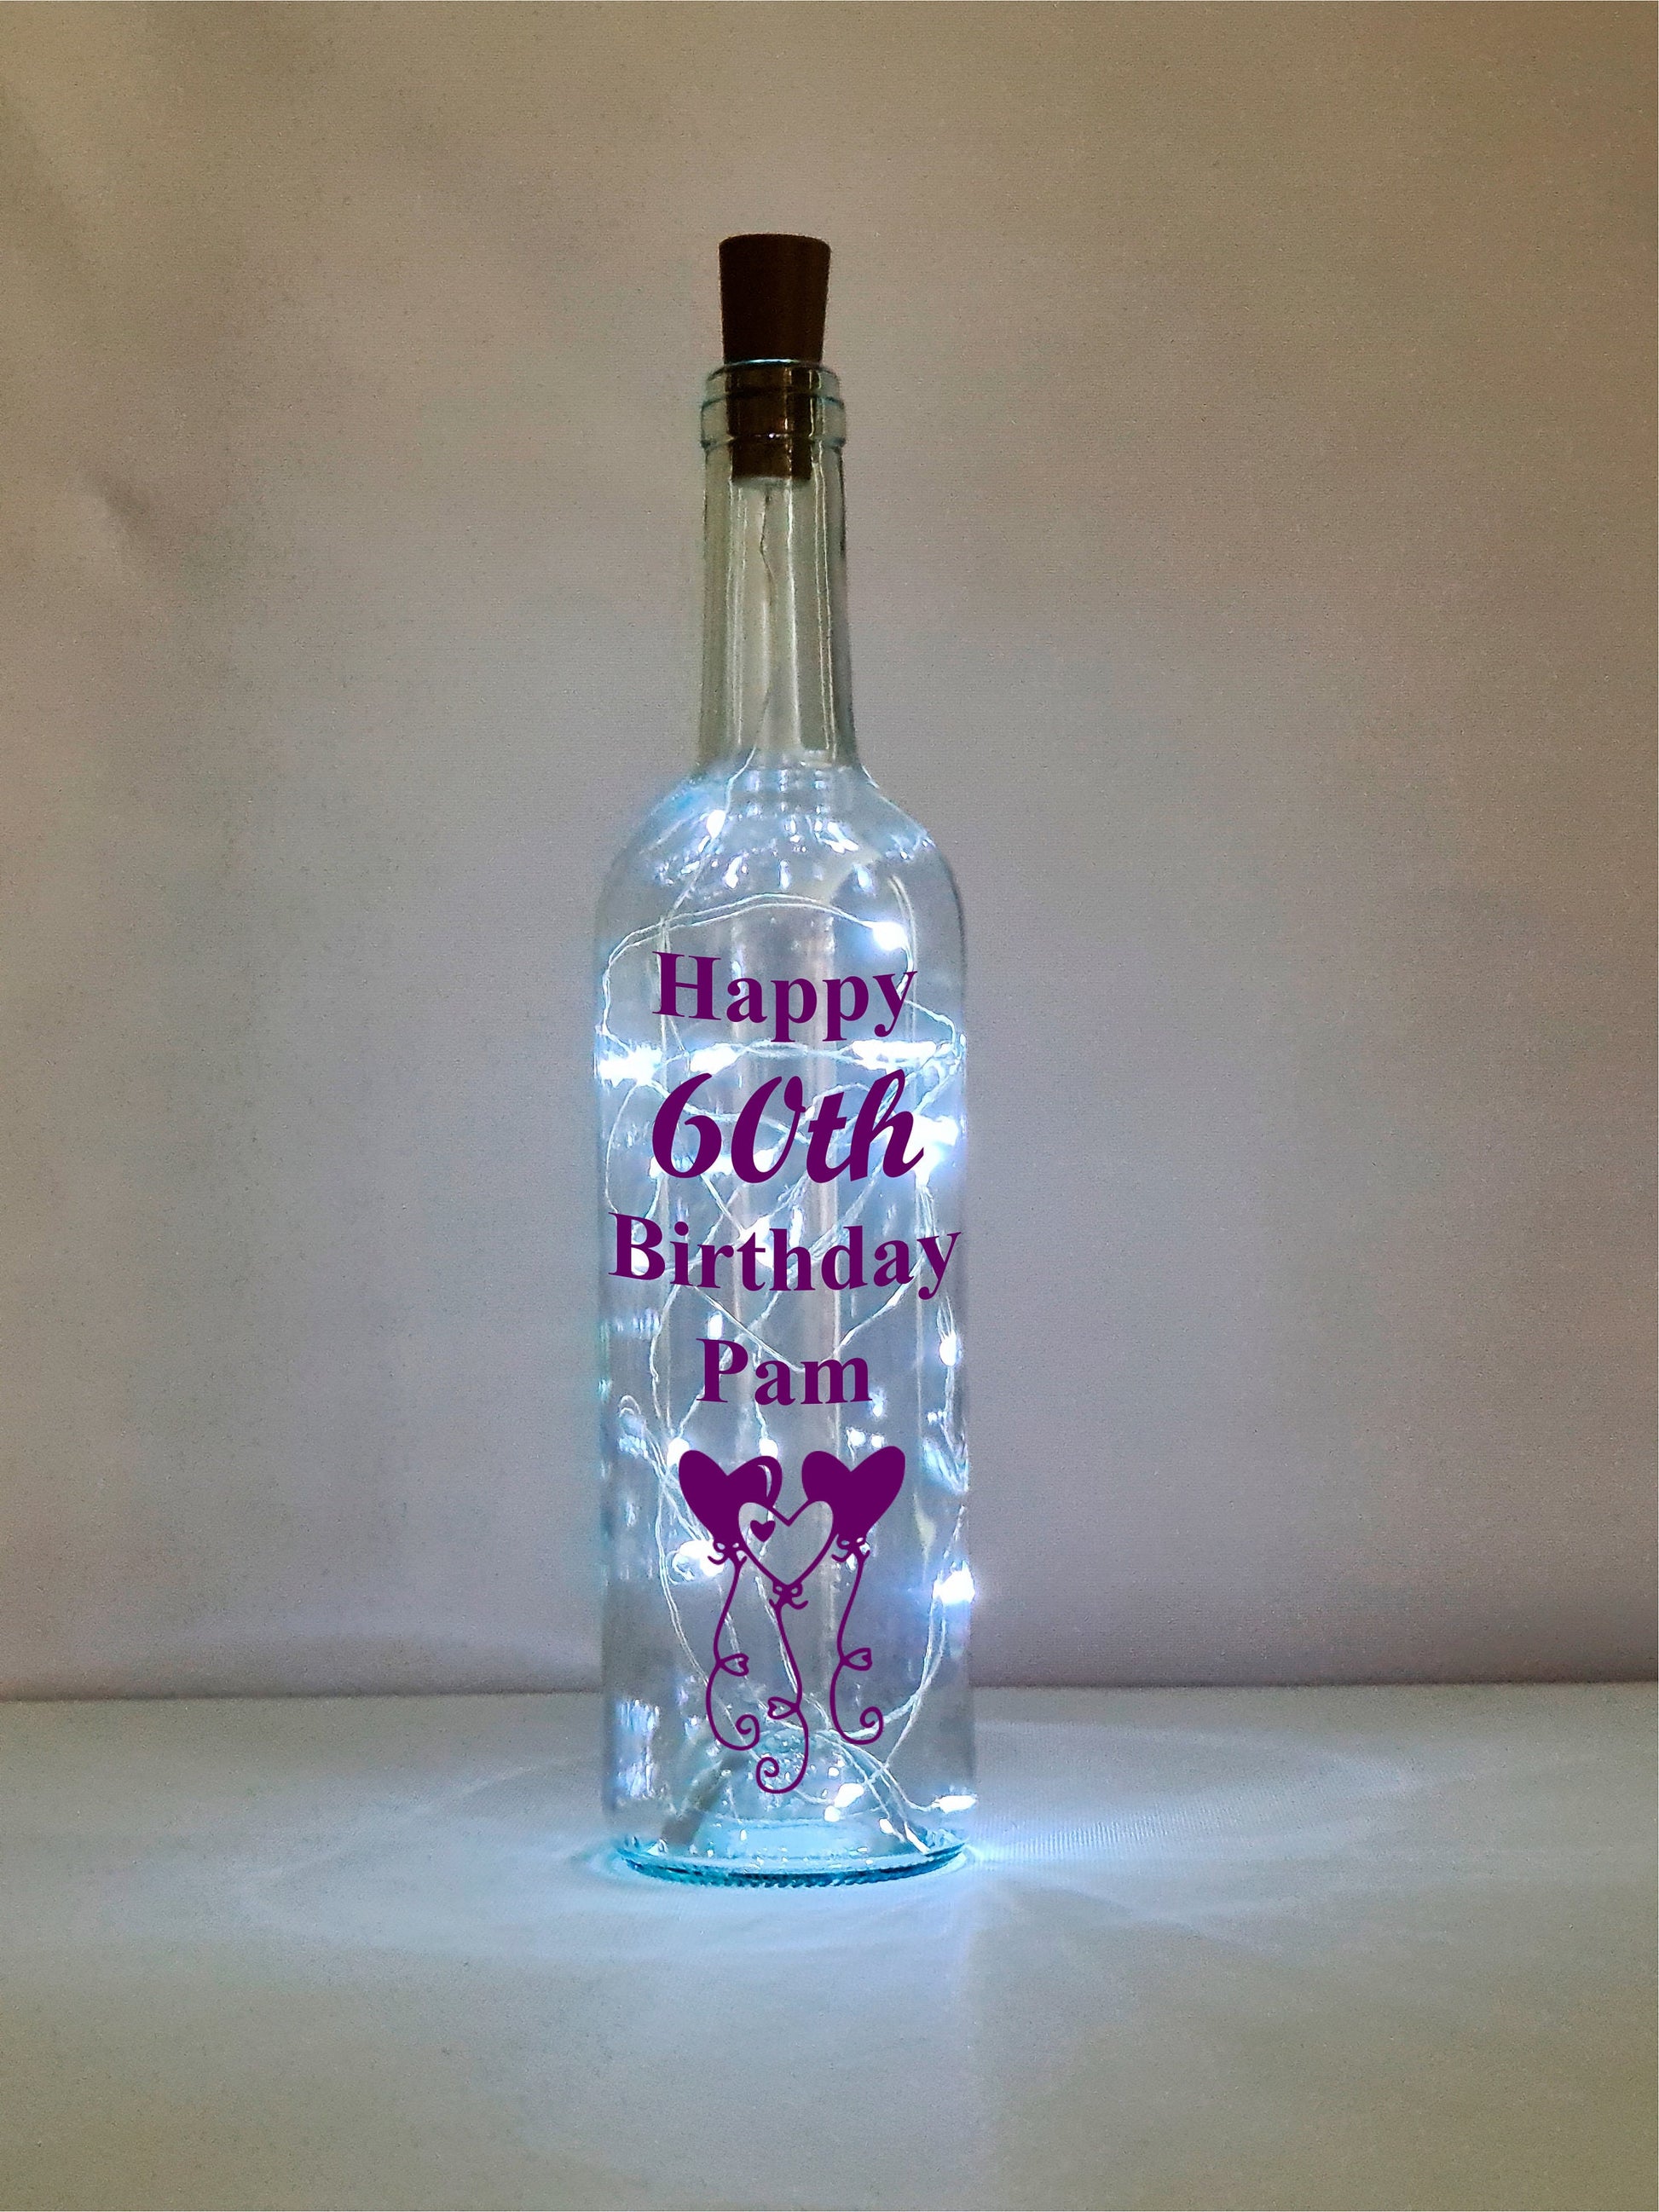 Personalised 60th Birthday Gift For Her, Light Up Balloon Wine Bottle, Birthday Gift For Woman, Best Friend Present, Mum Birthday Gift, Wife